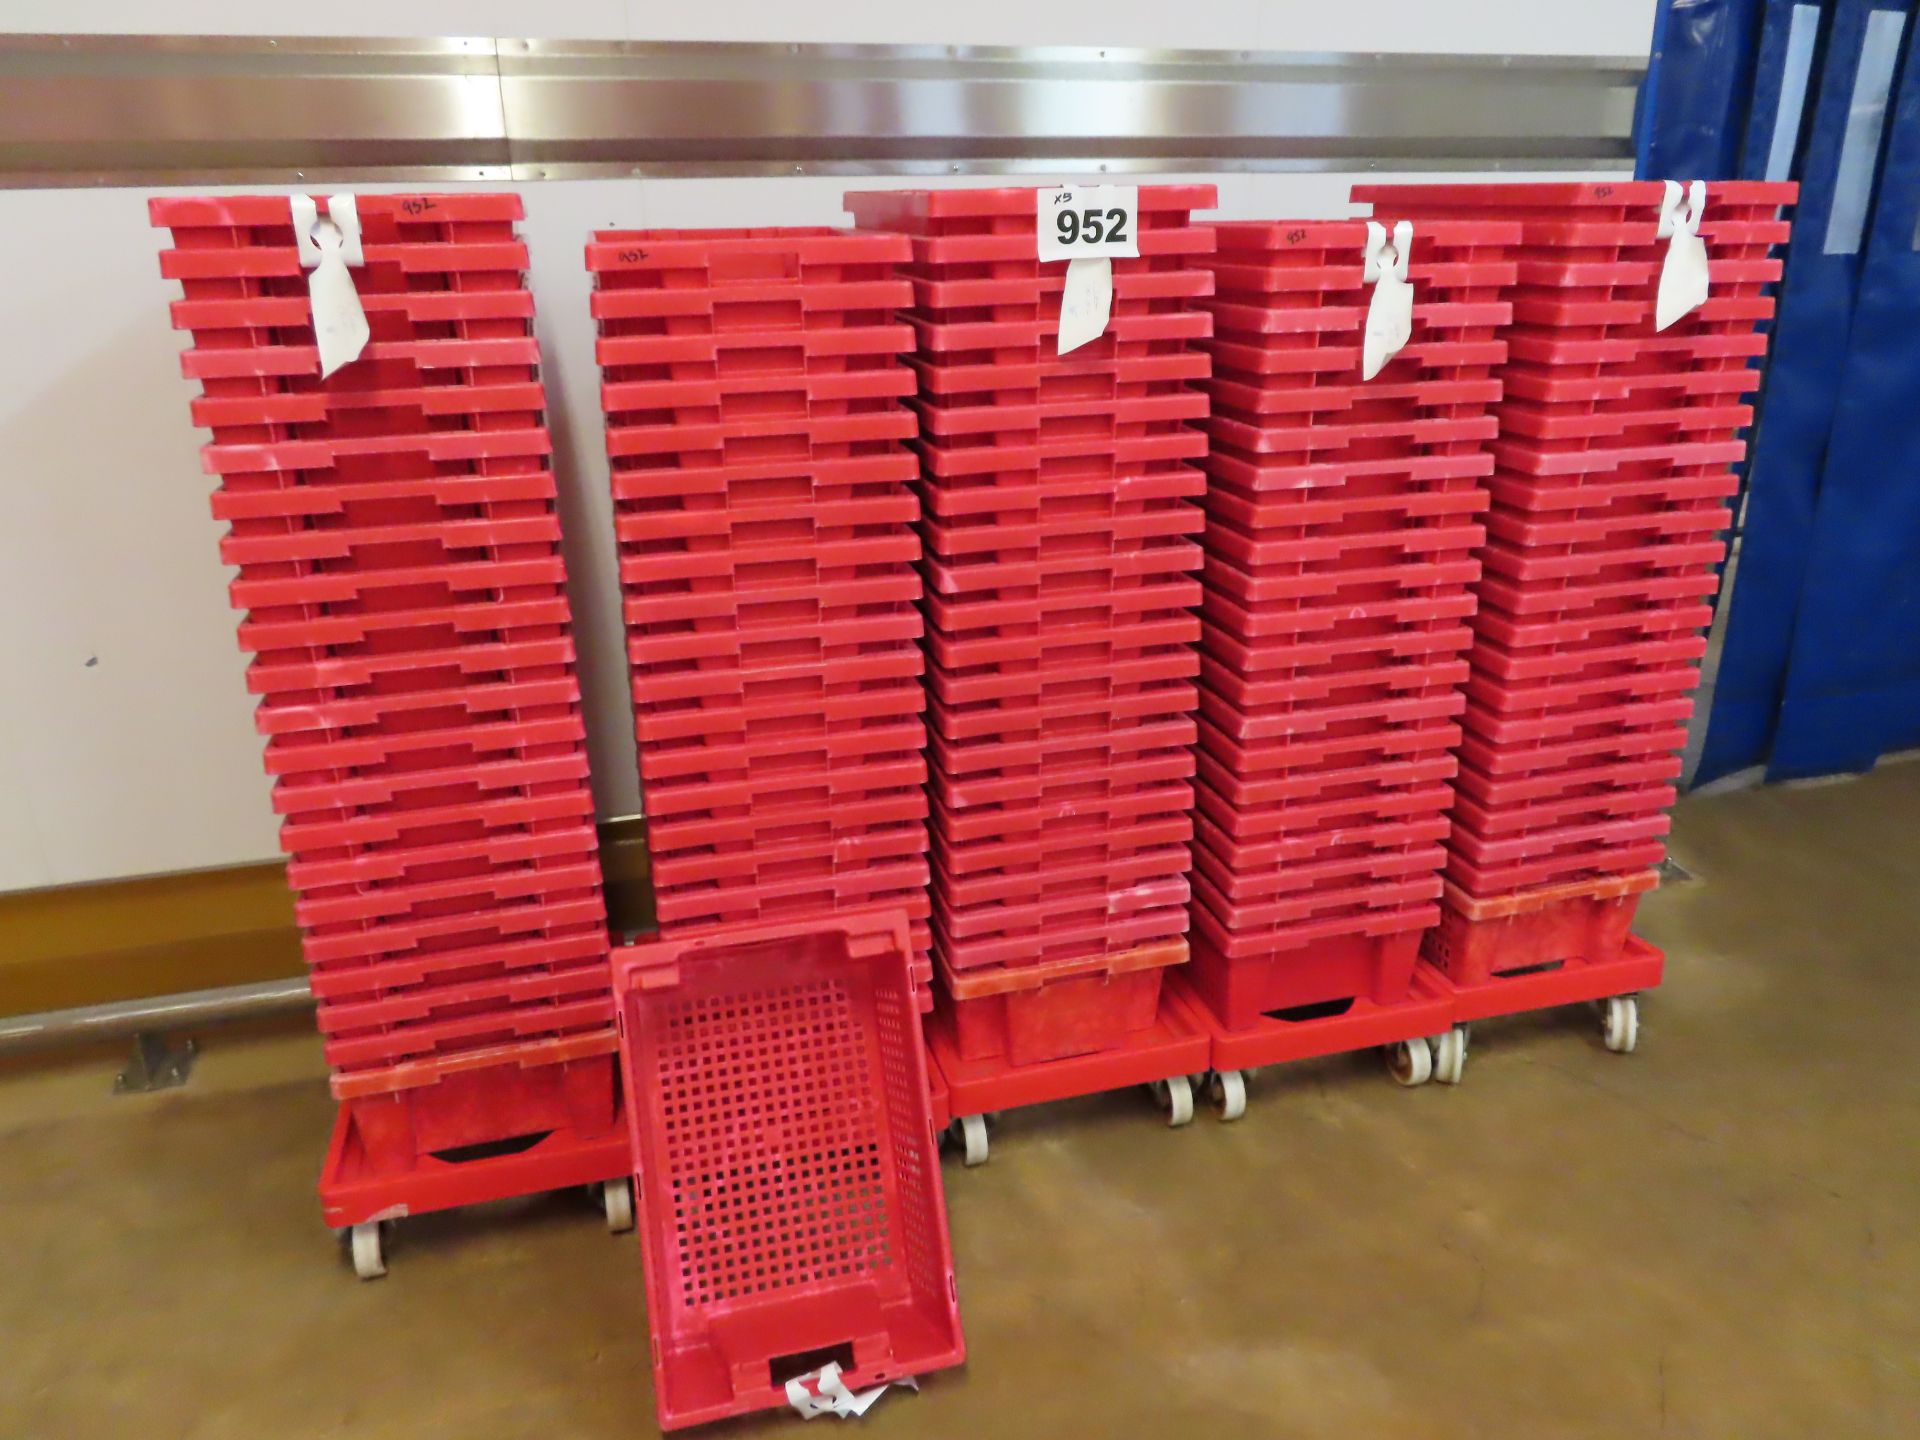 5 X DOLLIES HOLDING 30 OF RED PERFORATED TRAYS per dollie. 150 tray